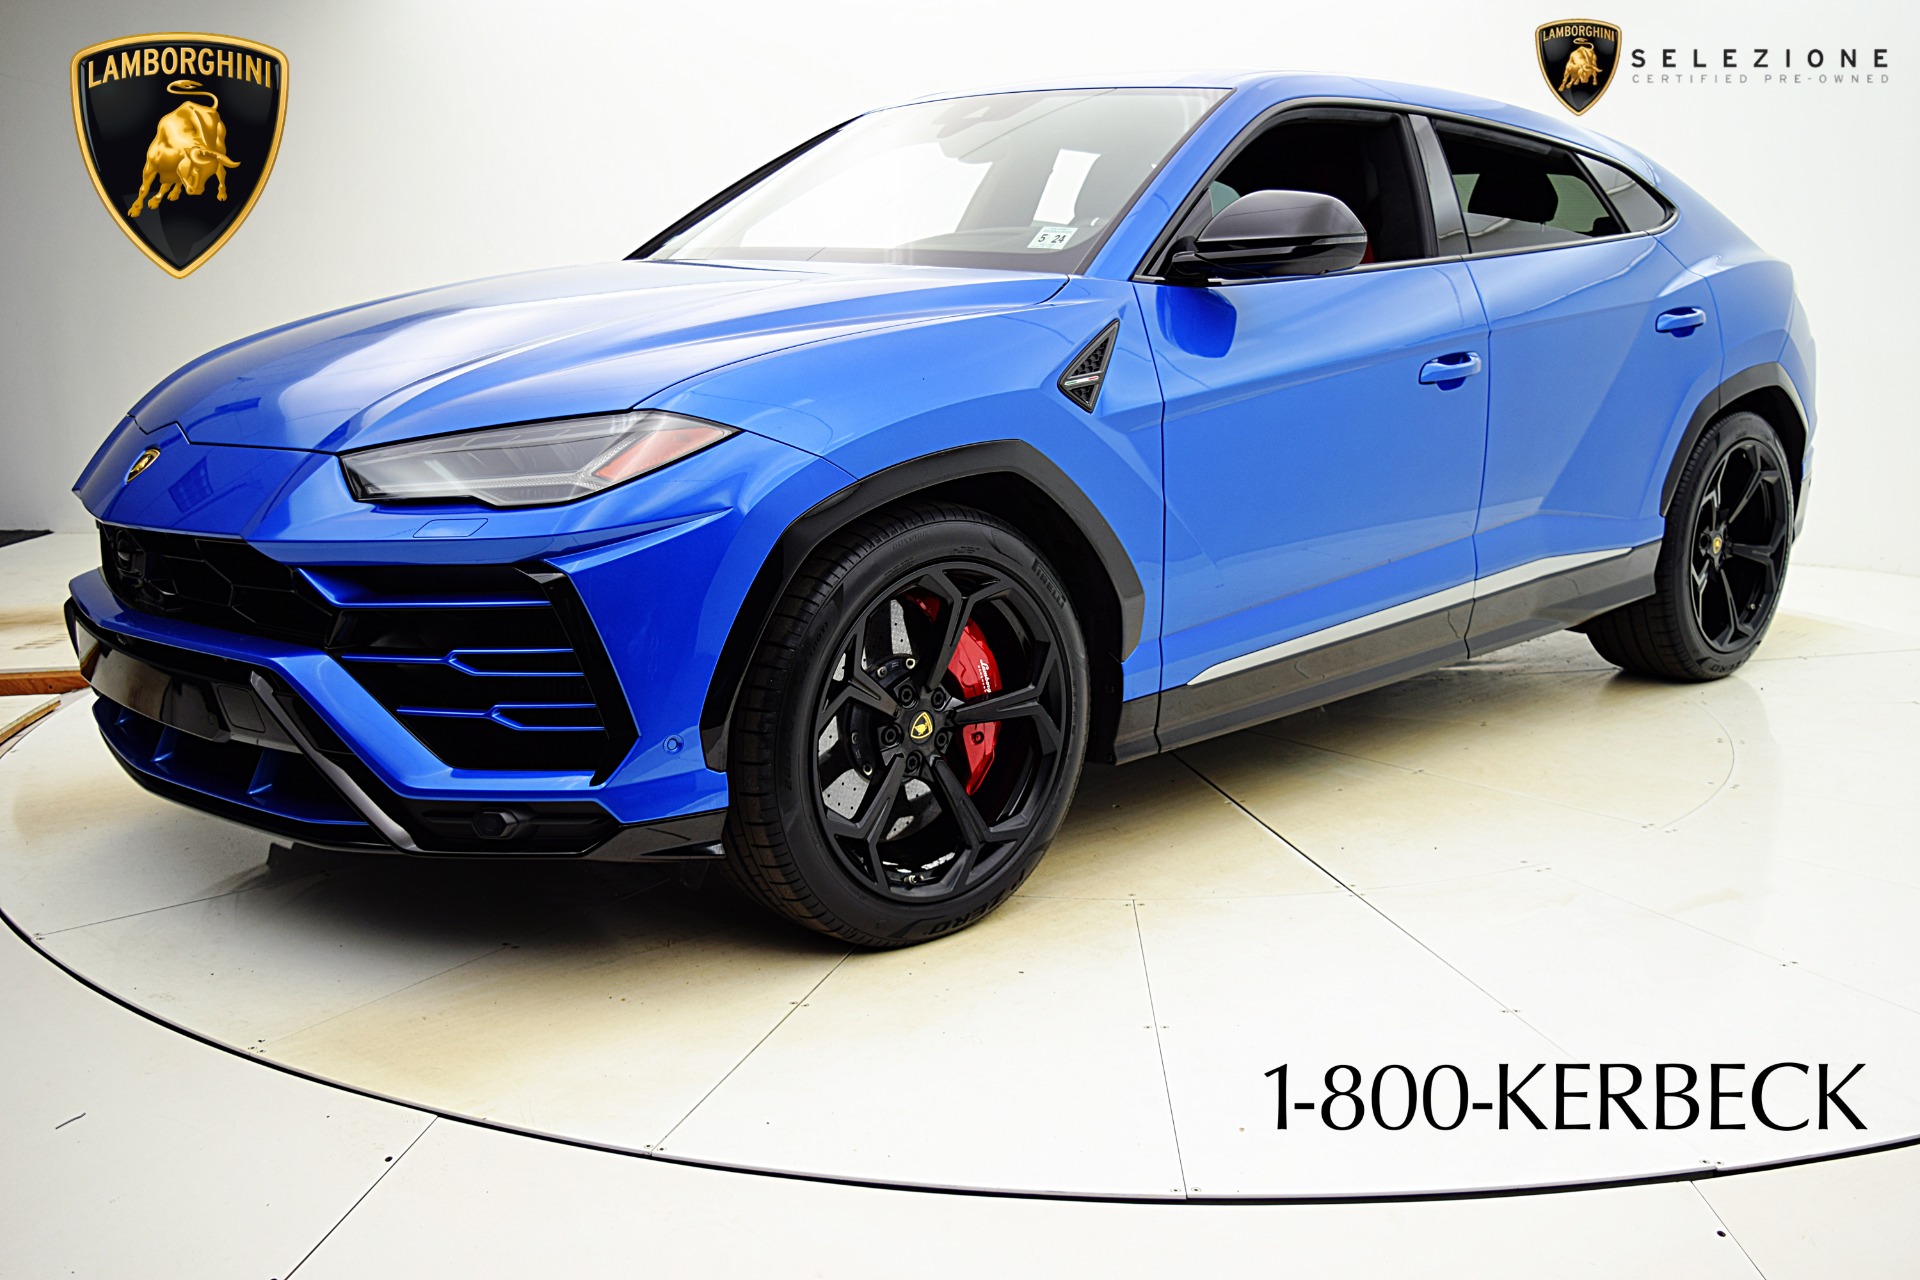 Used 2019 Lamborghini Urus / LEASE OPTIONS AVAILABLE for sale $249,000 at Bentley Palmyra N.J. in Palmyra NJ 08065 2